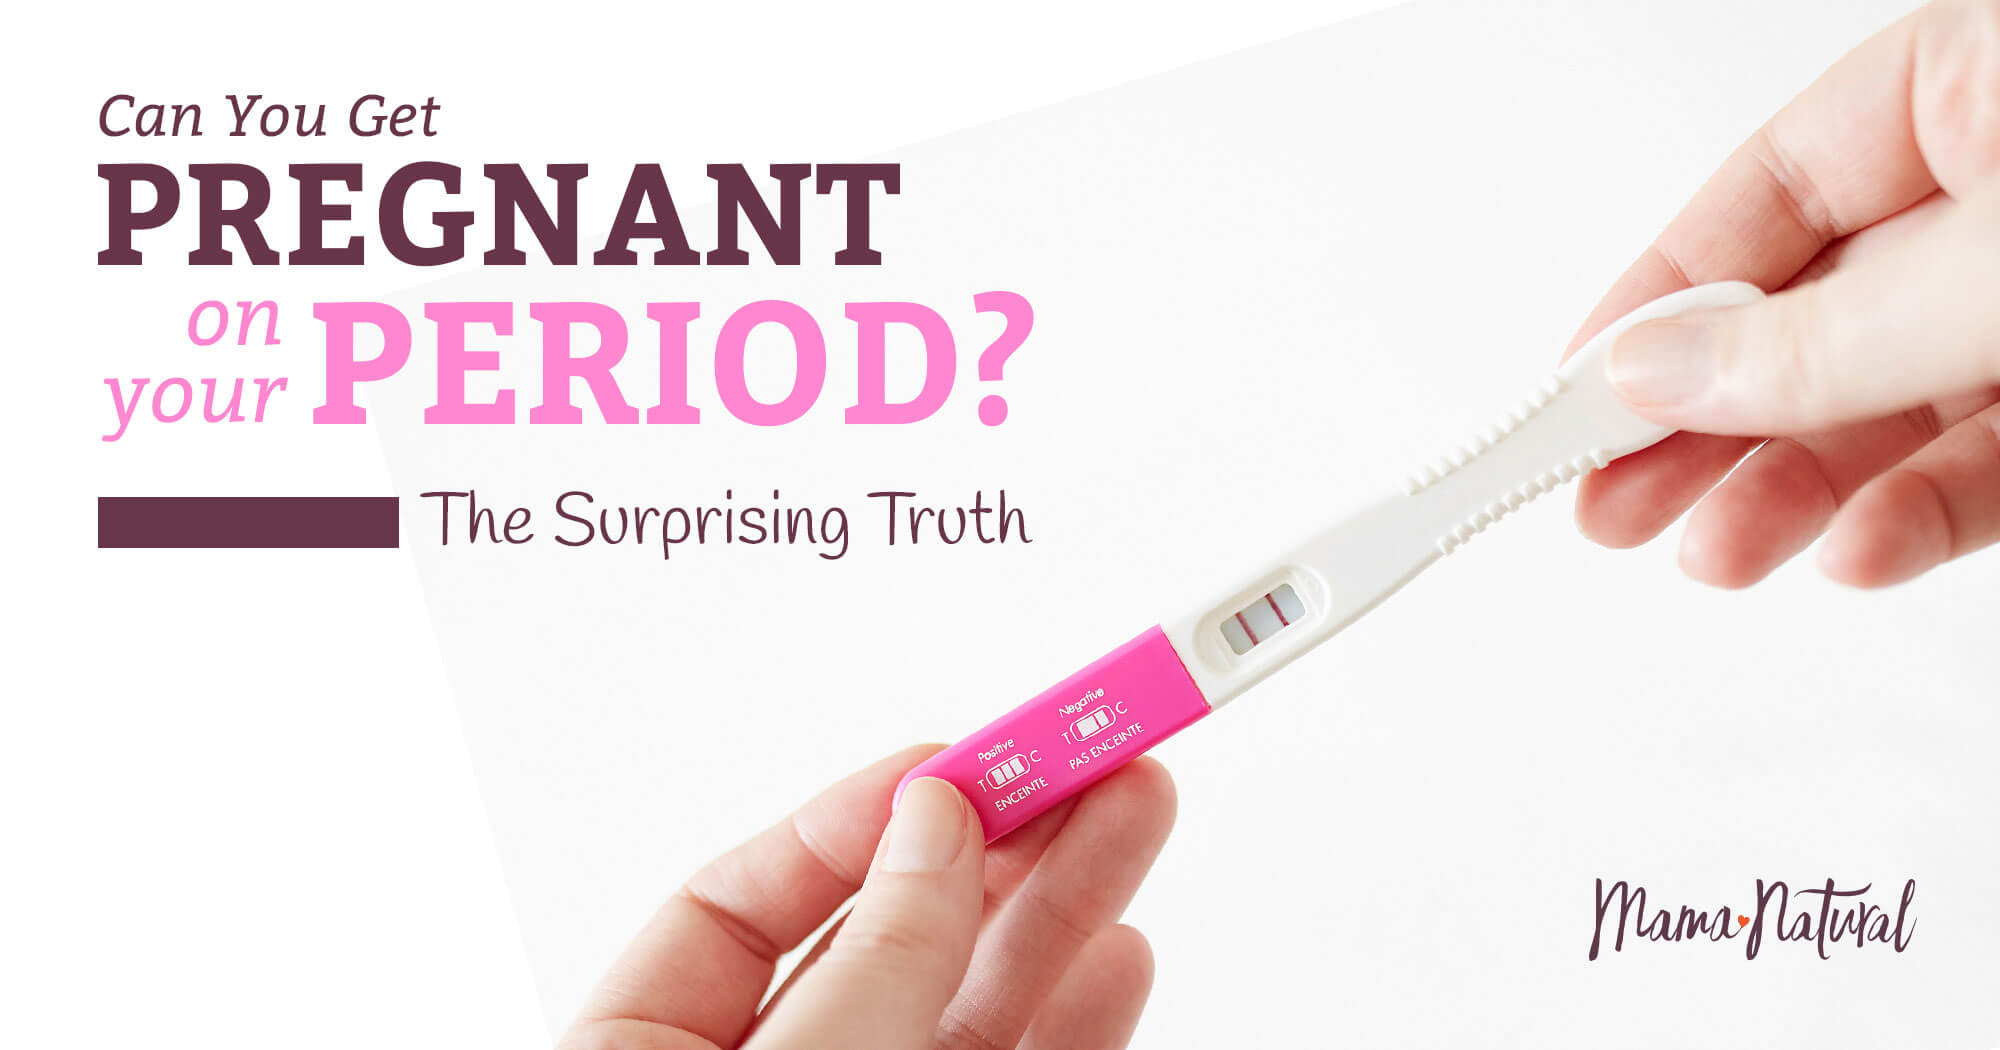 Can You Get Pregnant On Your Period? The Answer May Surprise You!